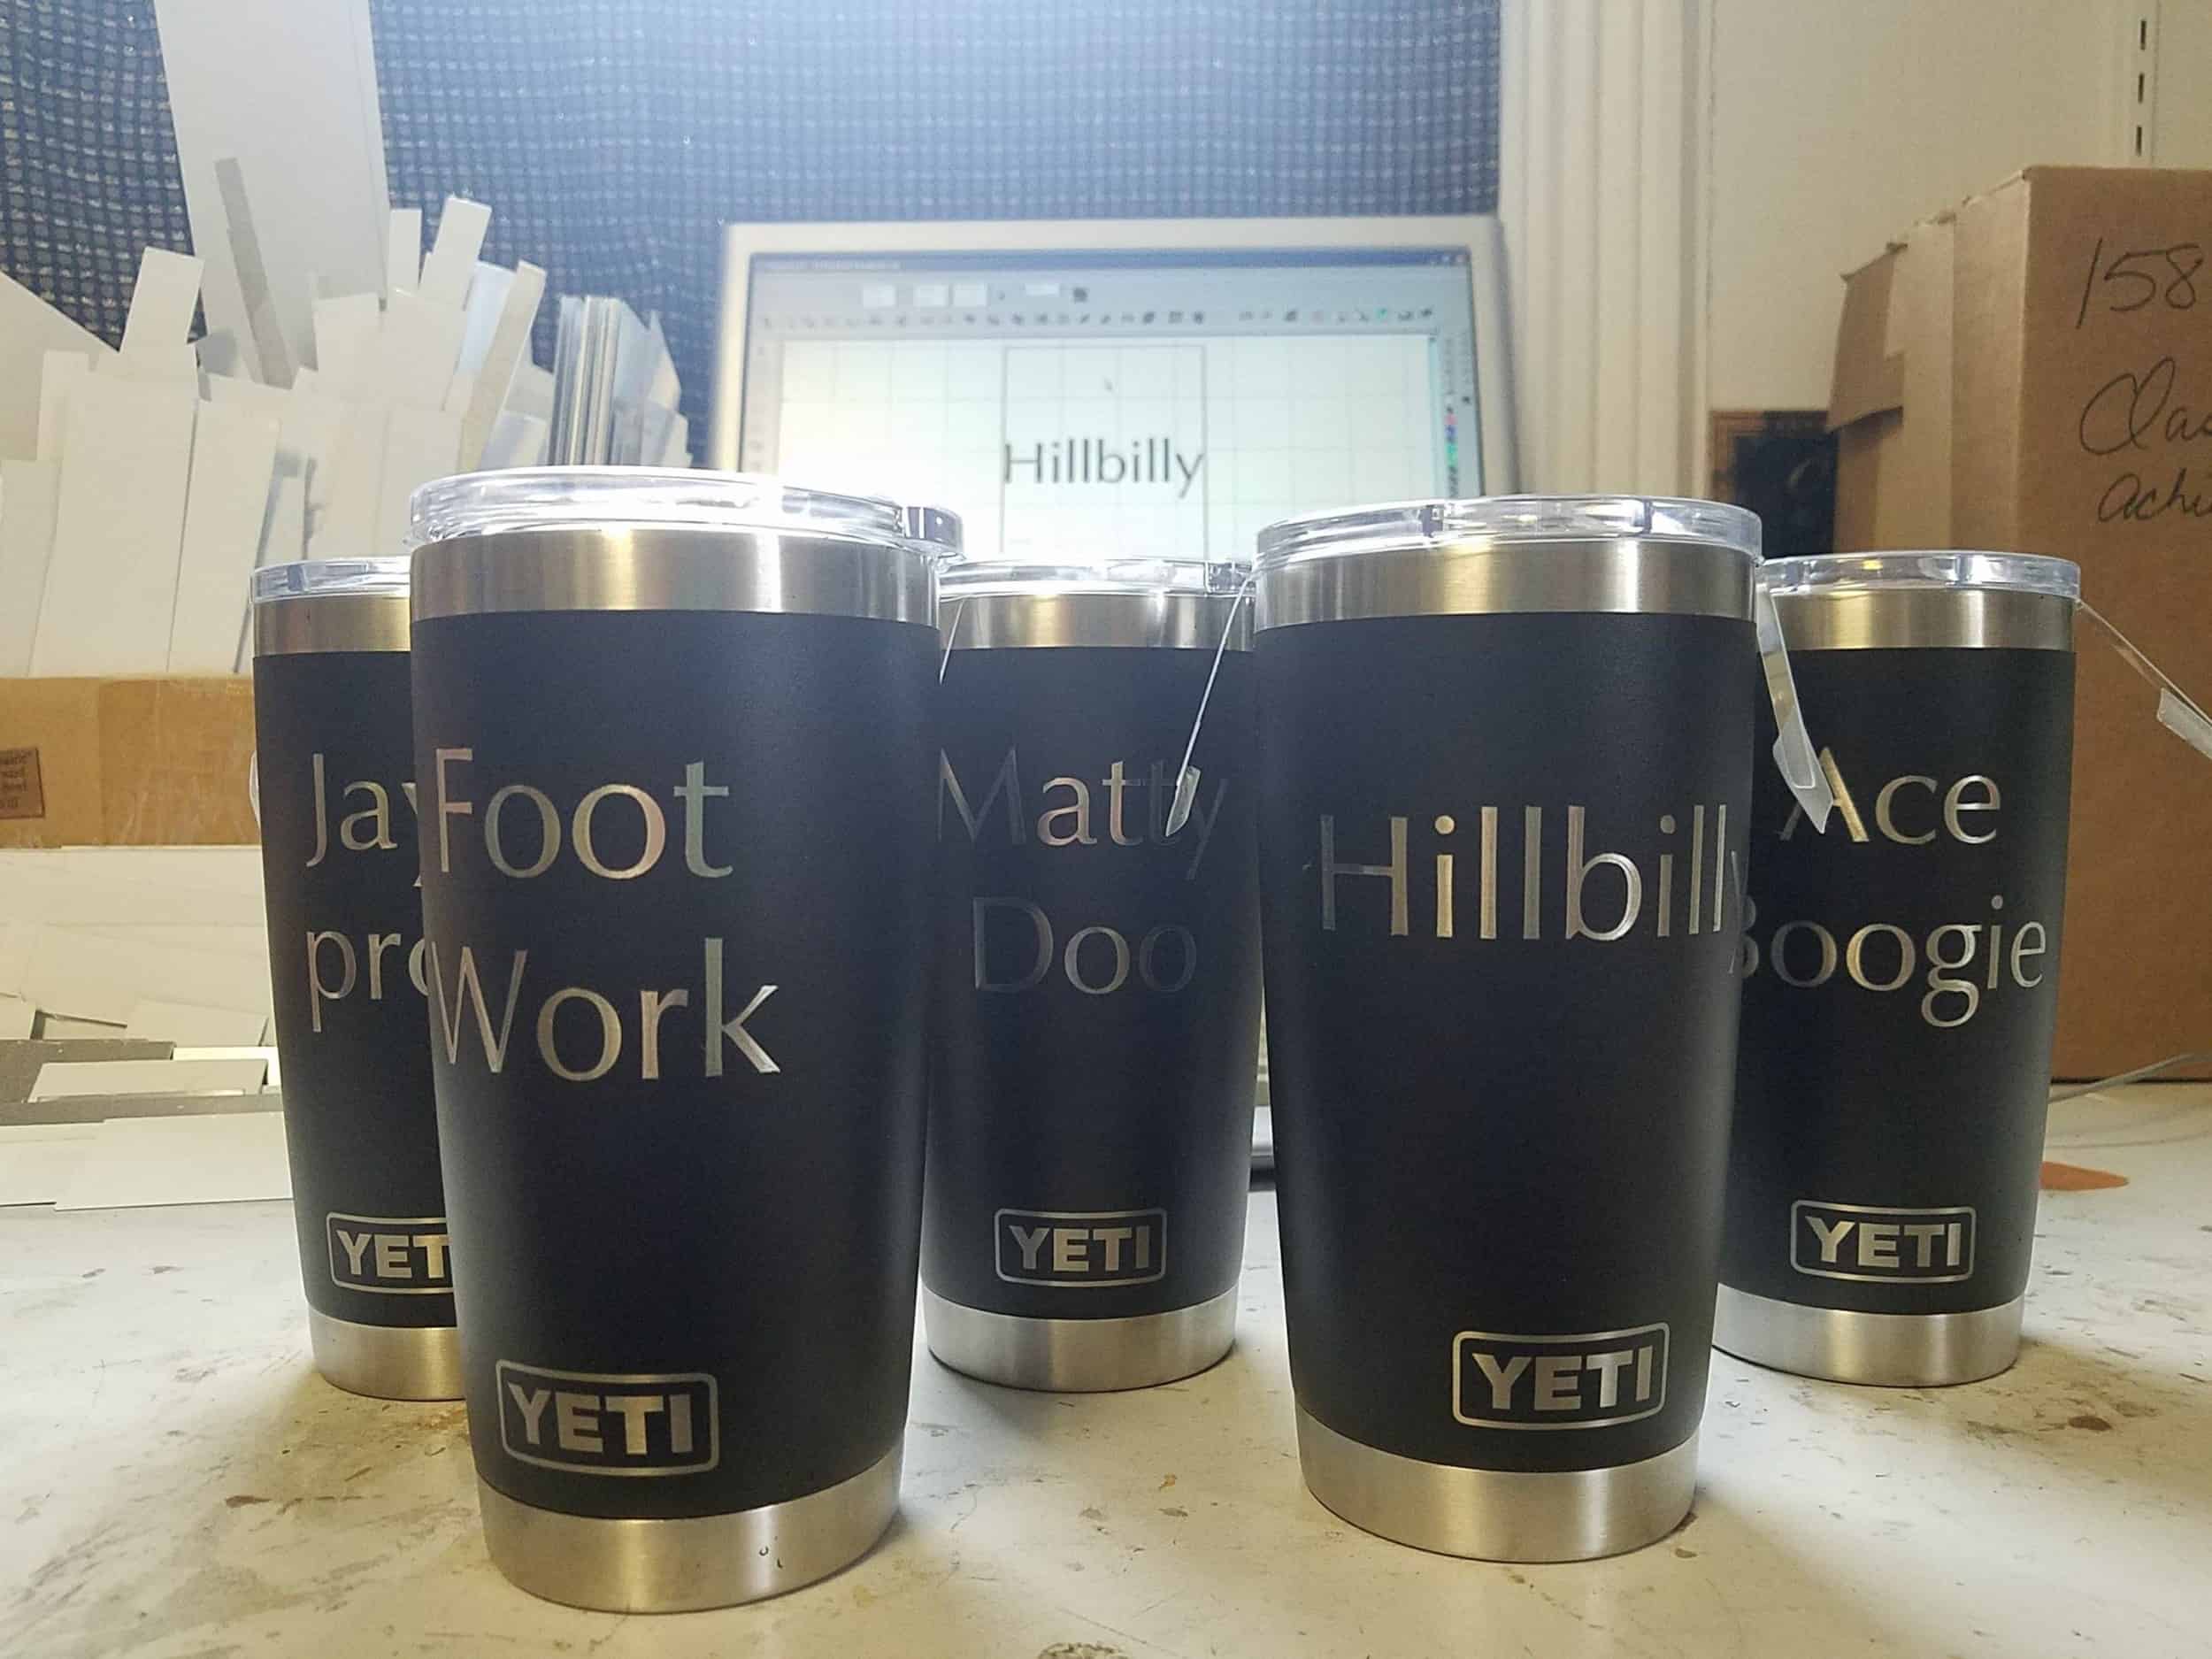 This Custom engraving - Yeti's is made with love by Studio Patty D! Shop more unique gift ideas today with Spots Initiatives, the best way to support creators.